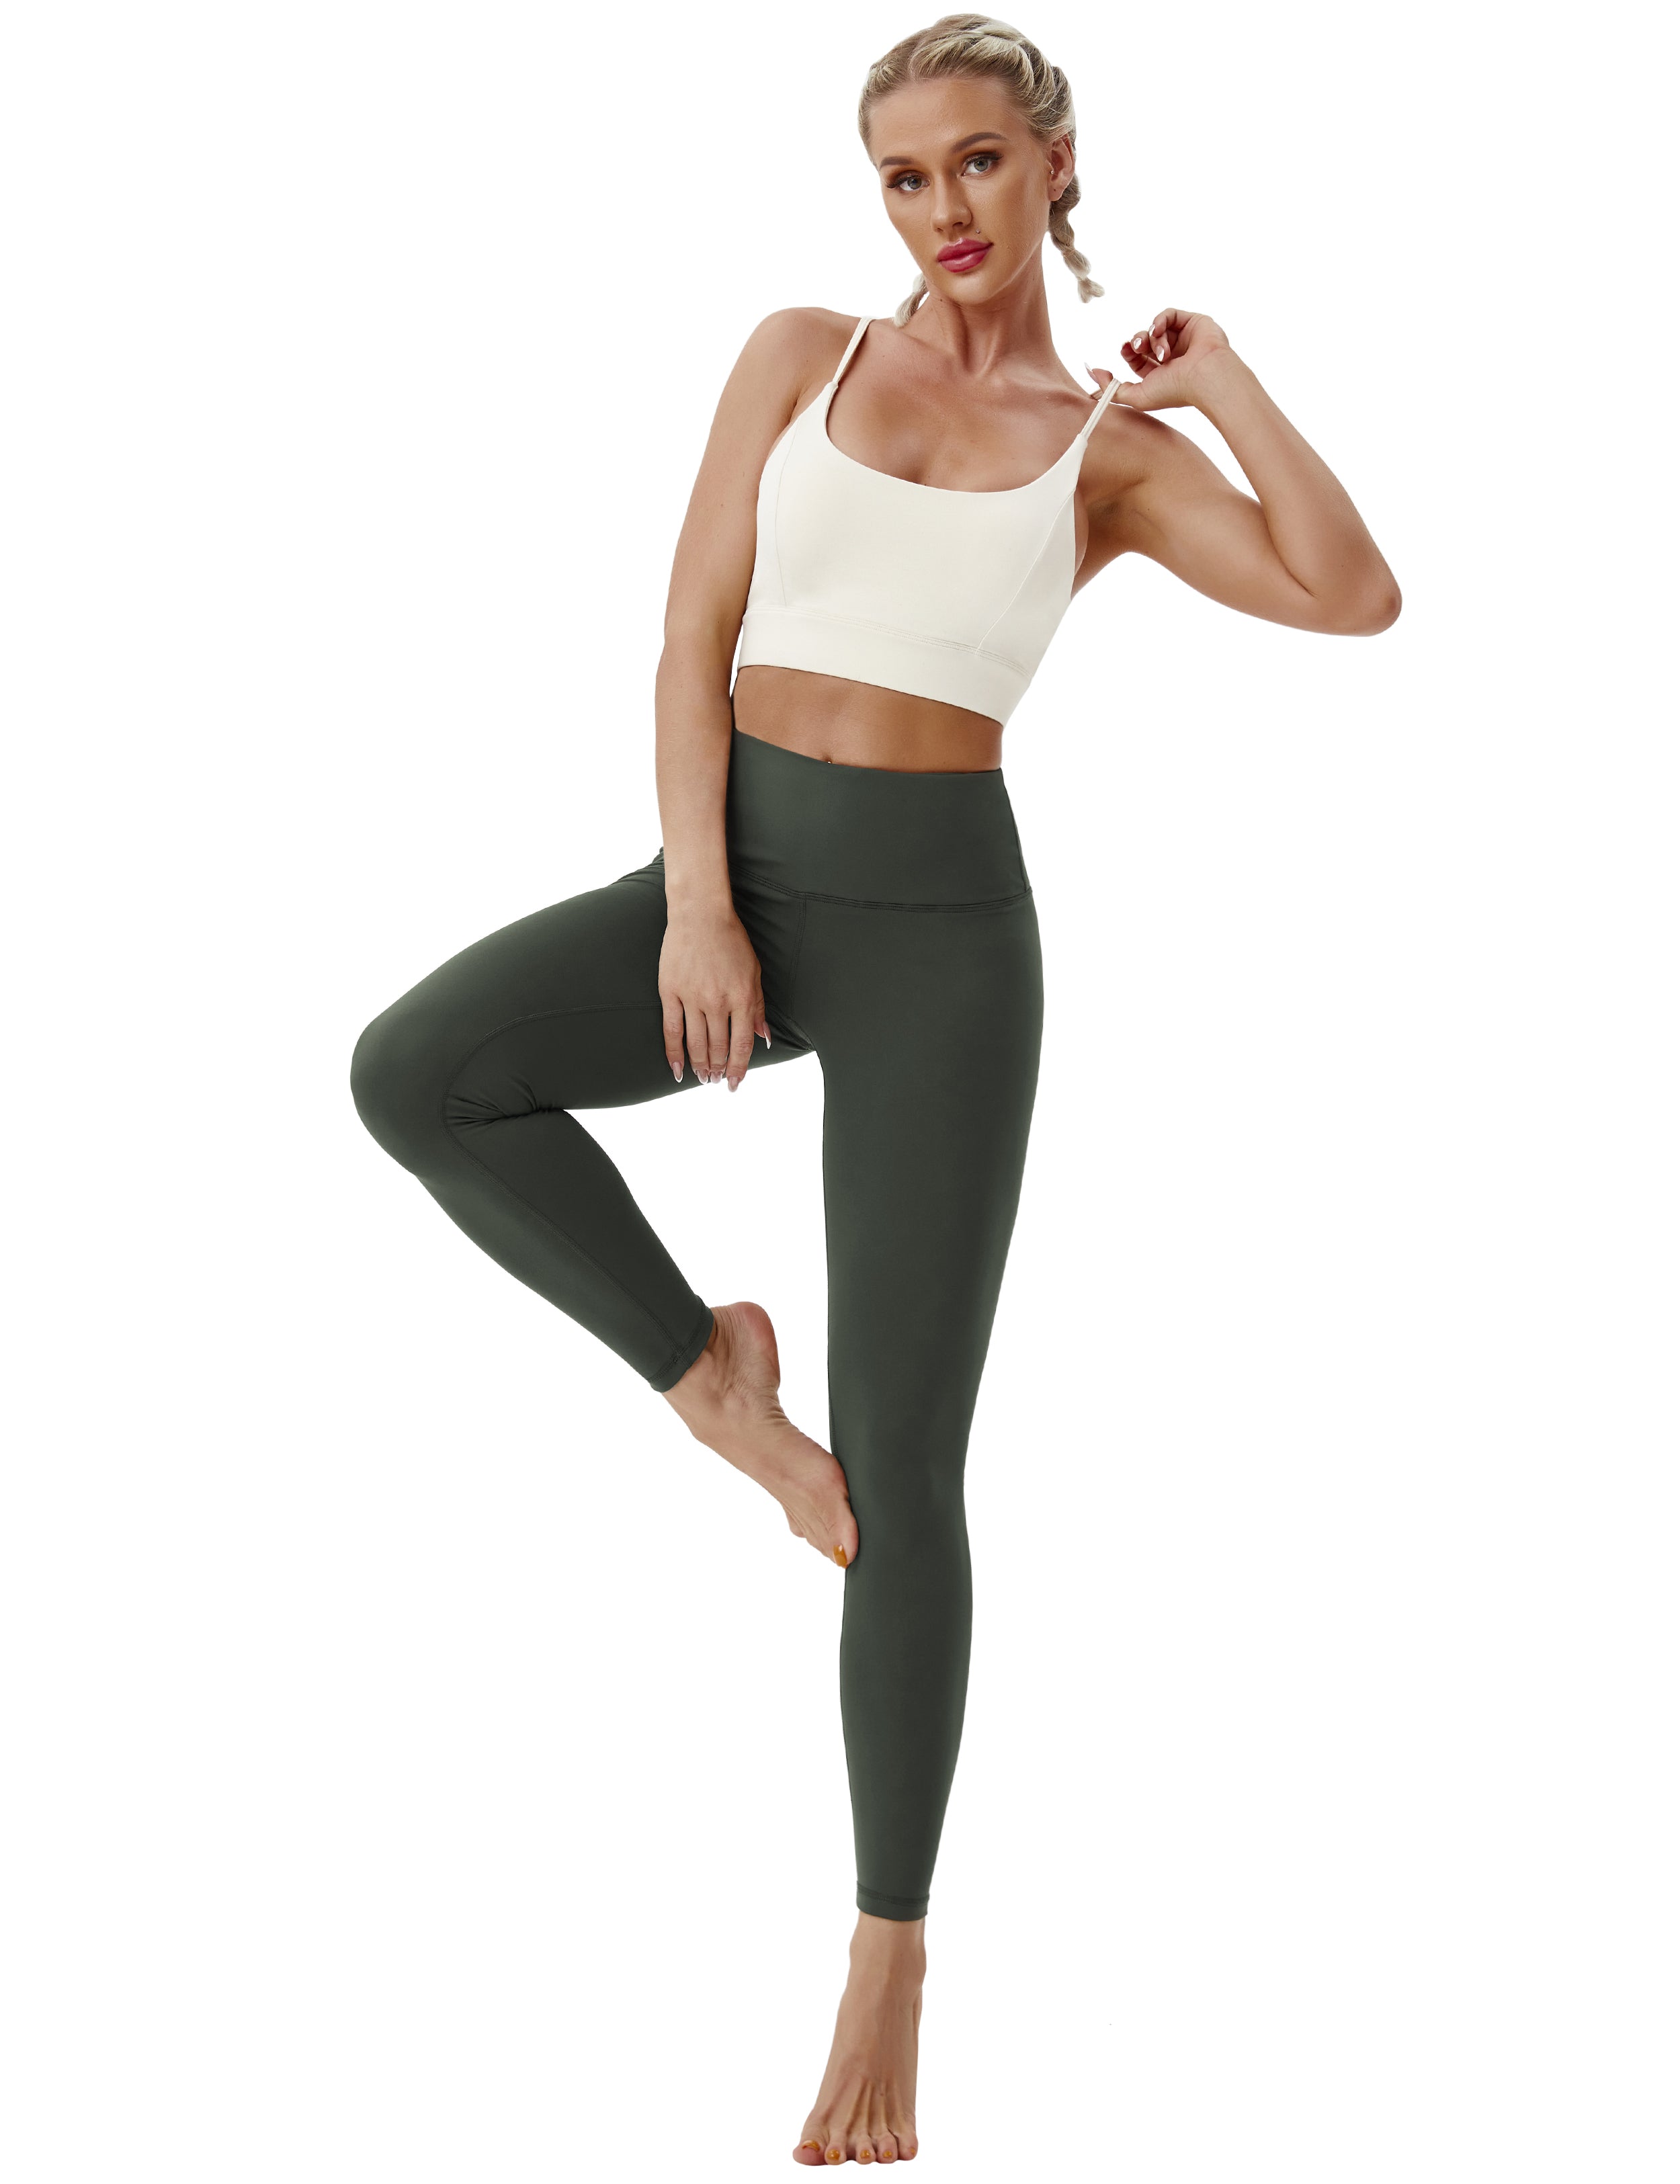 High Waist yogastudio Pants olivegray 75%Nylon/25%Spandex Fabric doesn't attract lint easily 4-way stretch No see-through Moisture-wicking Tummy control Inner pocket Four lengths